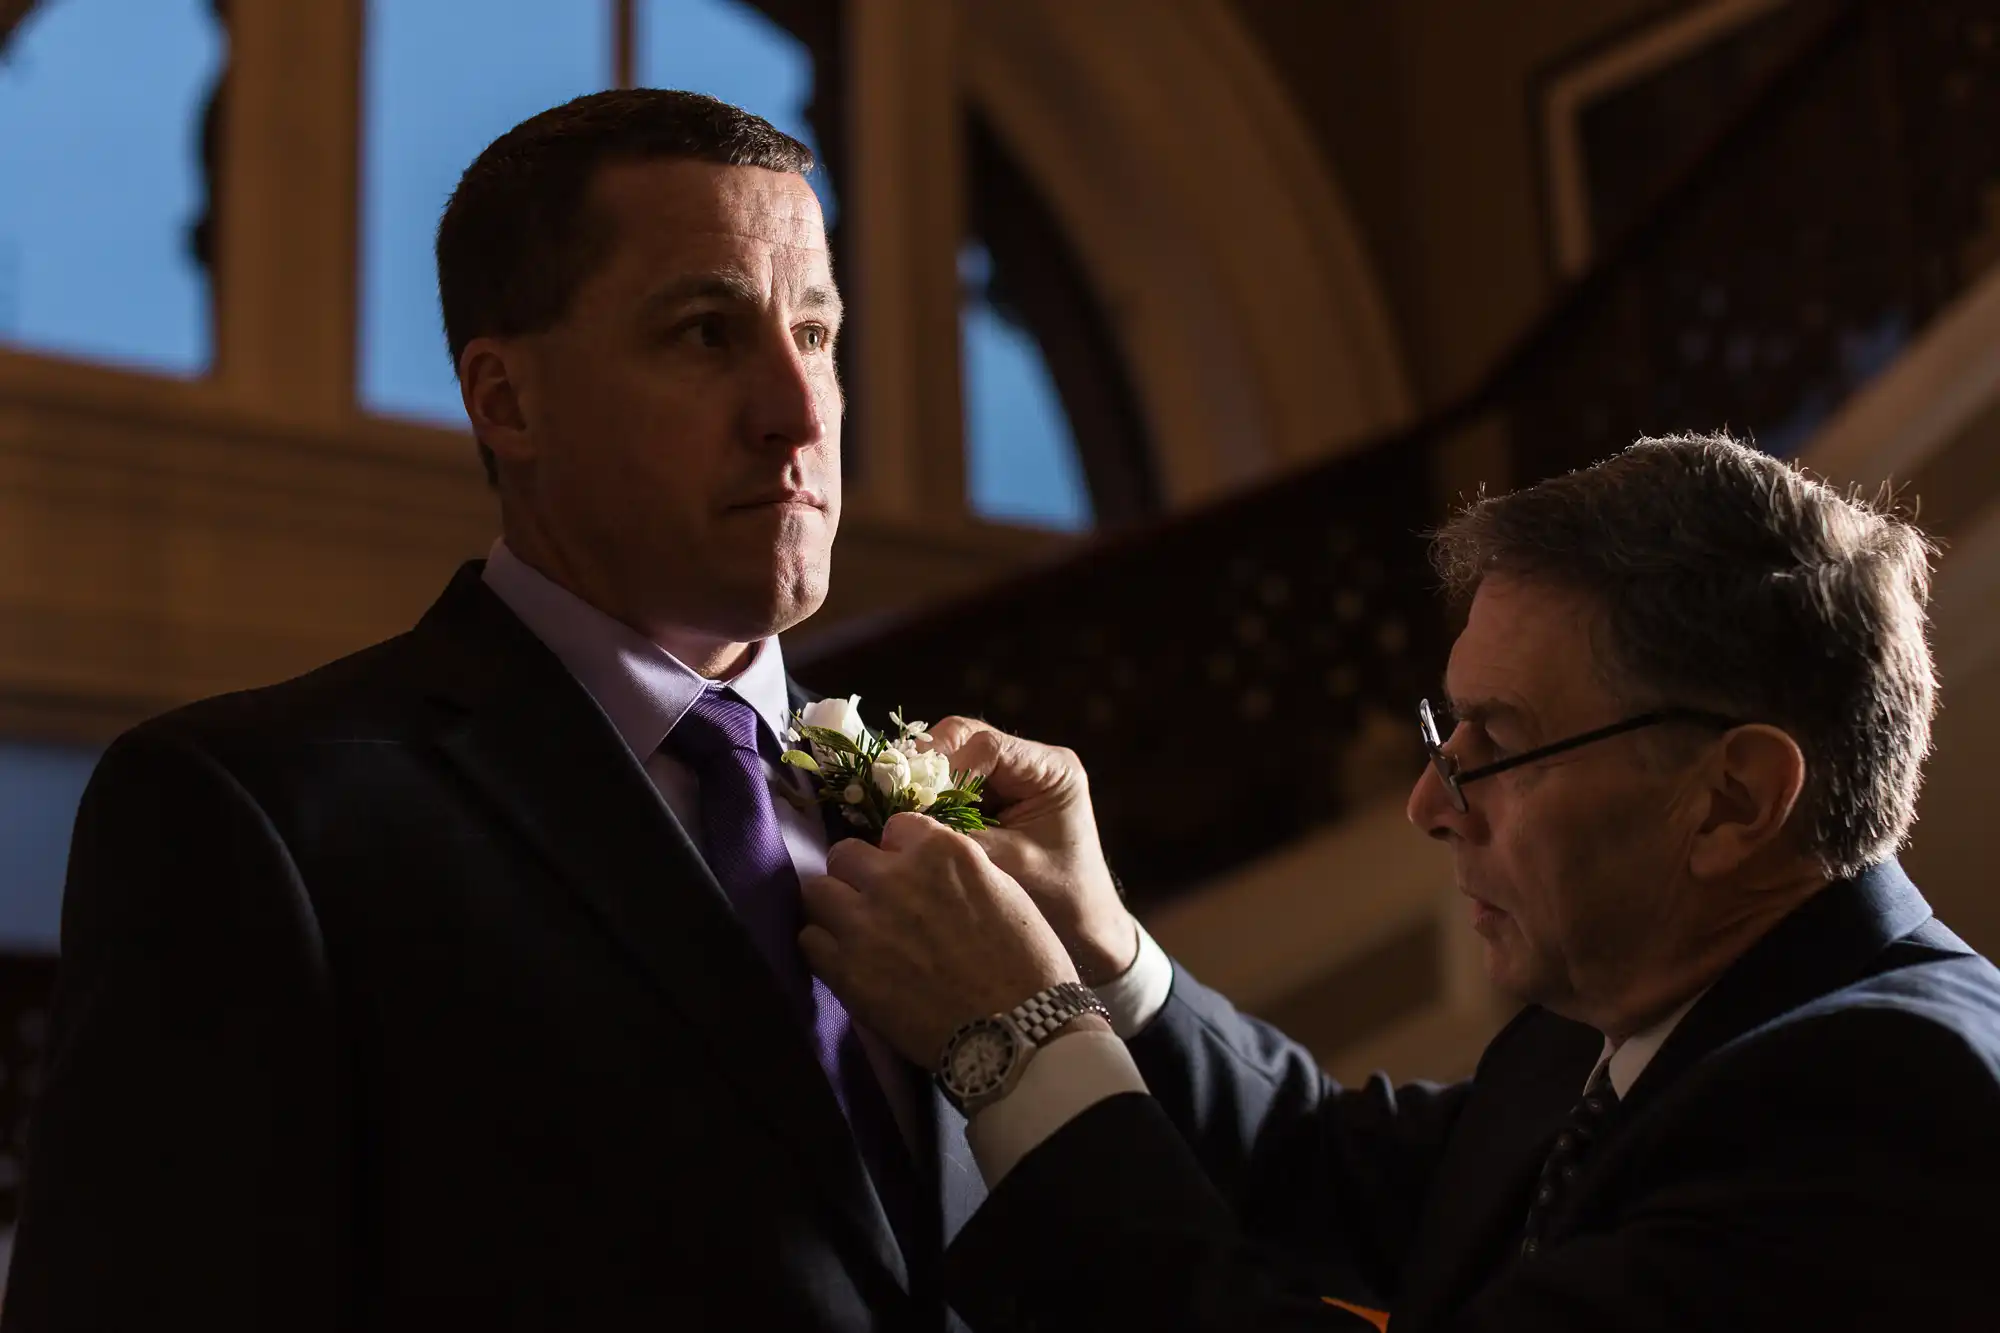 An older man adjusts a boutonniere on a younger man's suit jacket in a dimly lit room with wooden interiors.